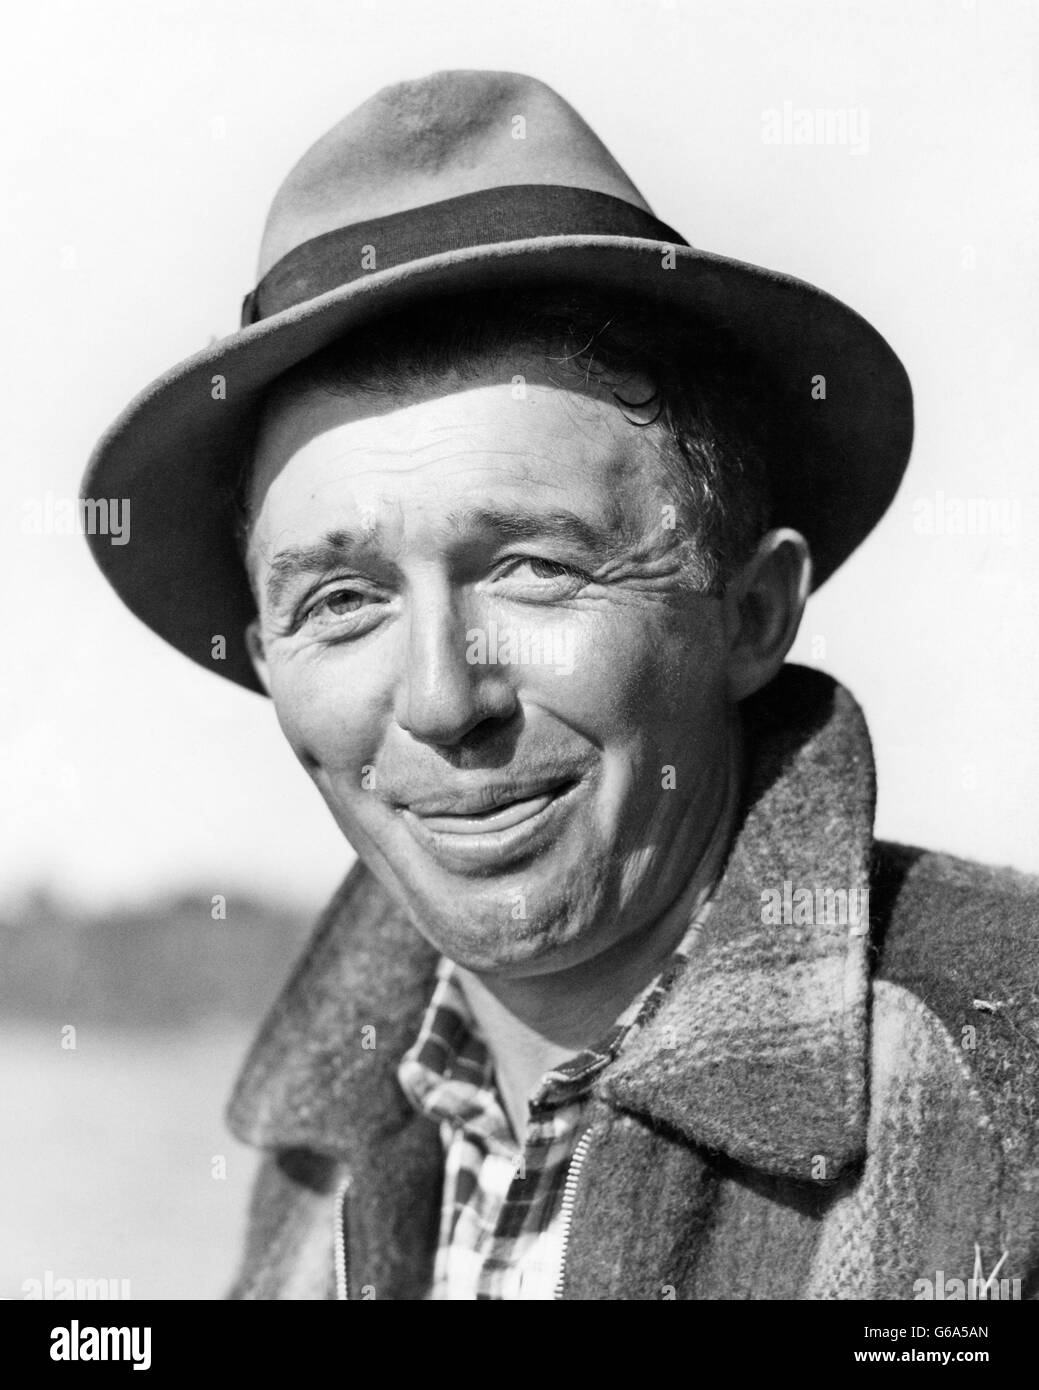 1930s PORTRAIT MAN WEARING HAT SMILING EYES LOOKING AT CAMERA TONGUE STICKING OUT LICKING HIS LIP FUNNY FACIAL EXPRESSION Stock Photo